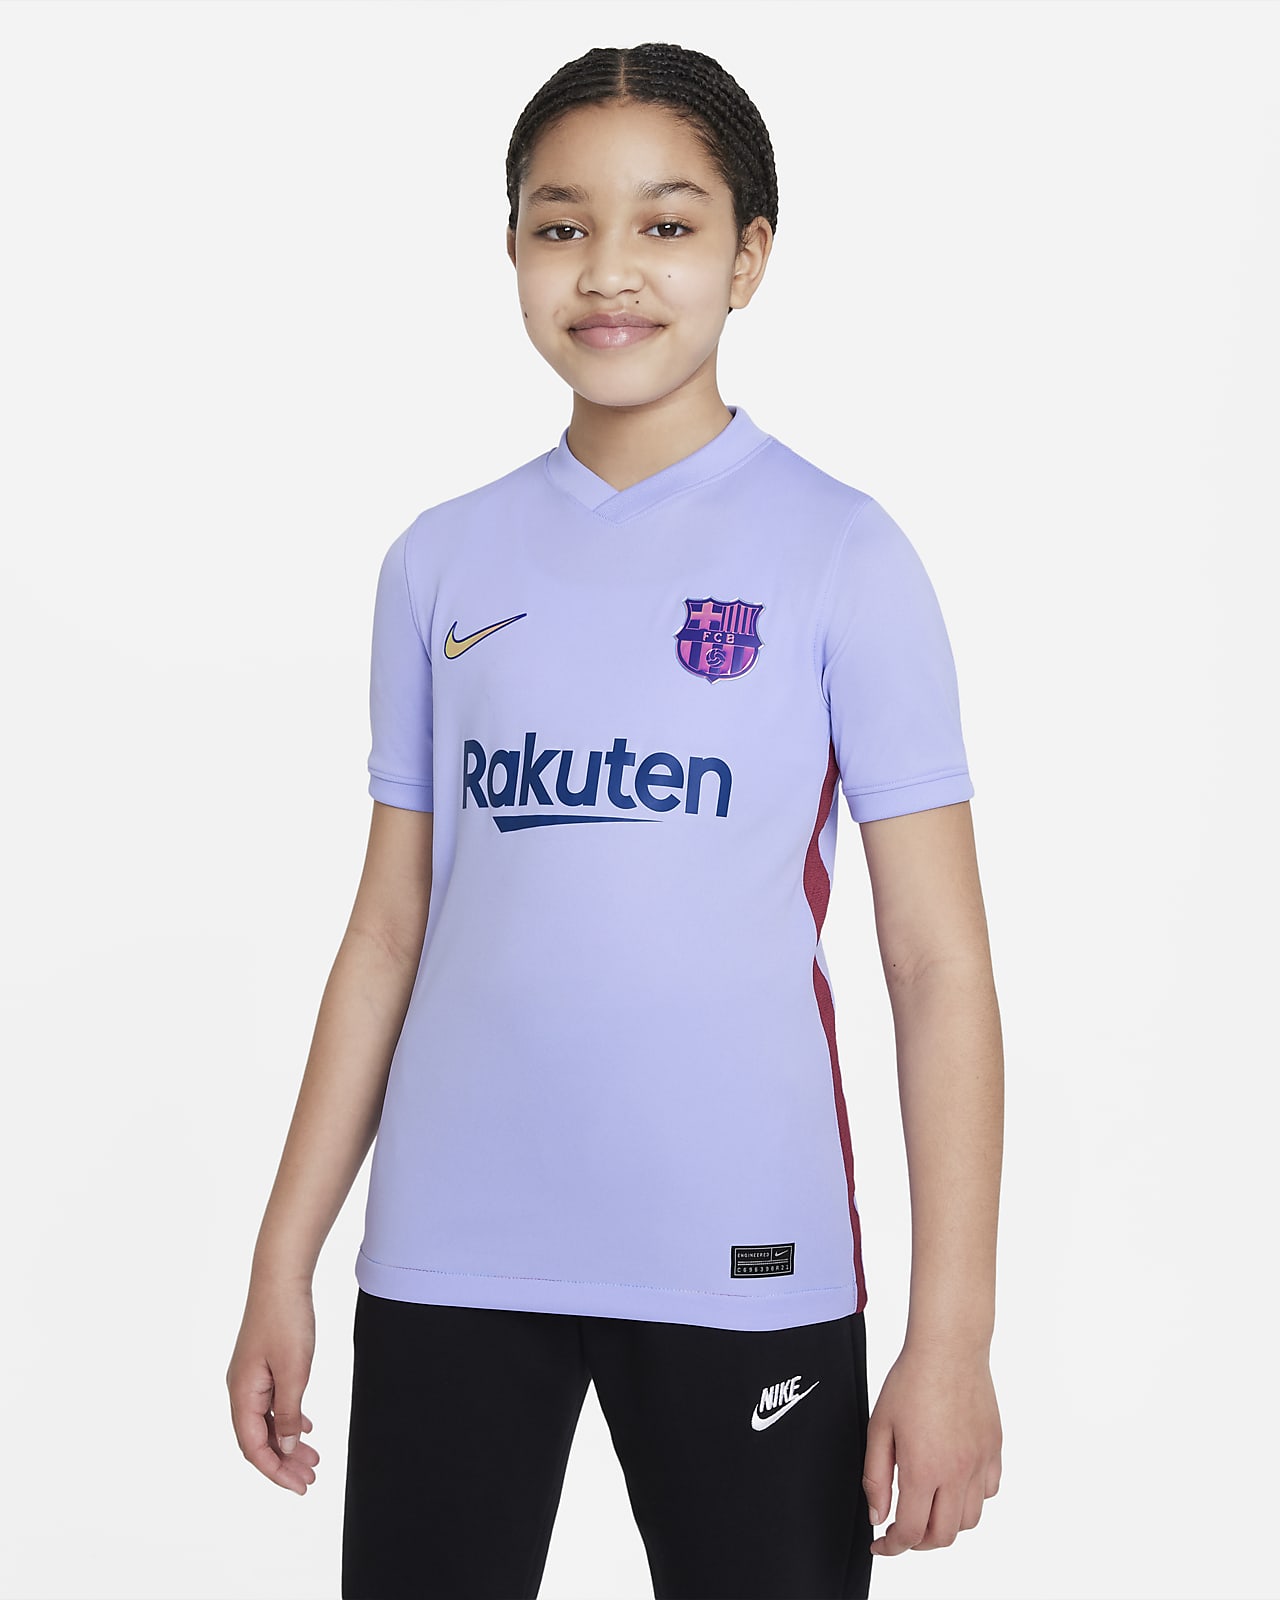 Barcelona 2021-22 kit: New home, away & third jersey styles & release dates